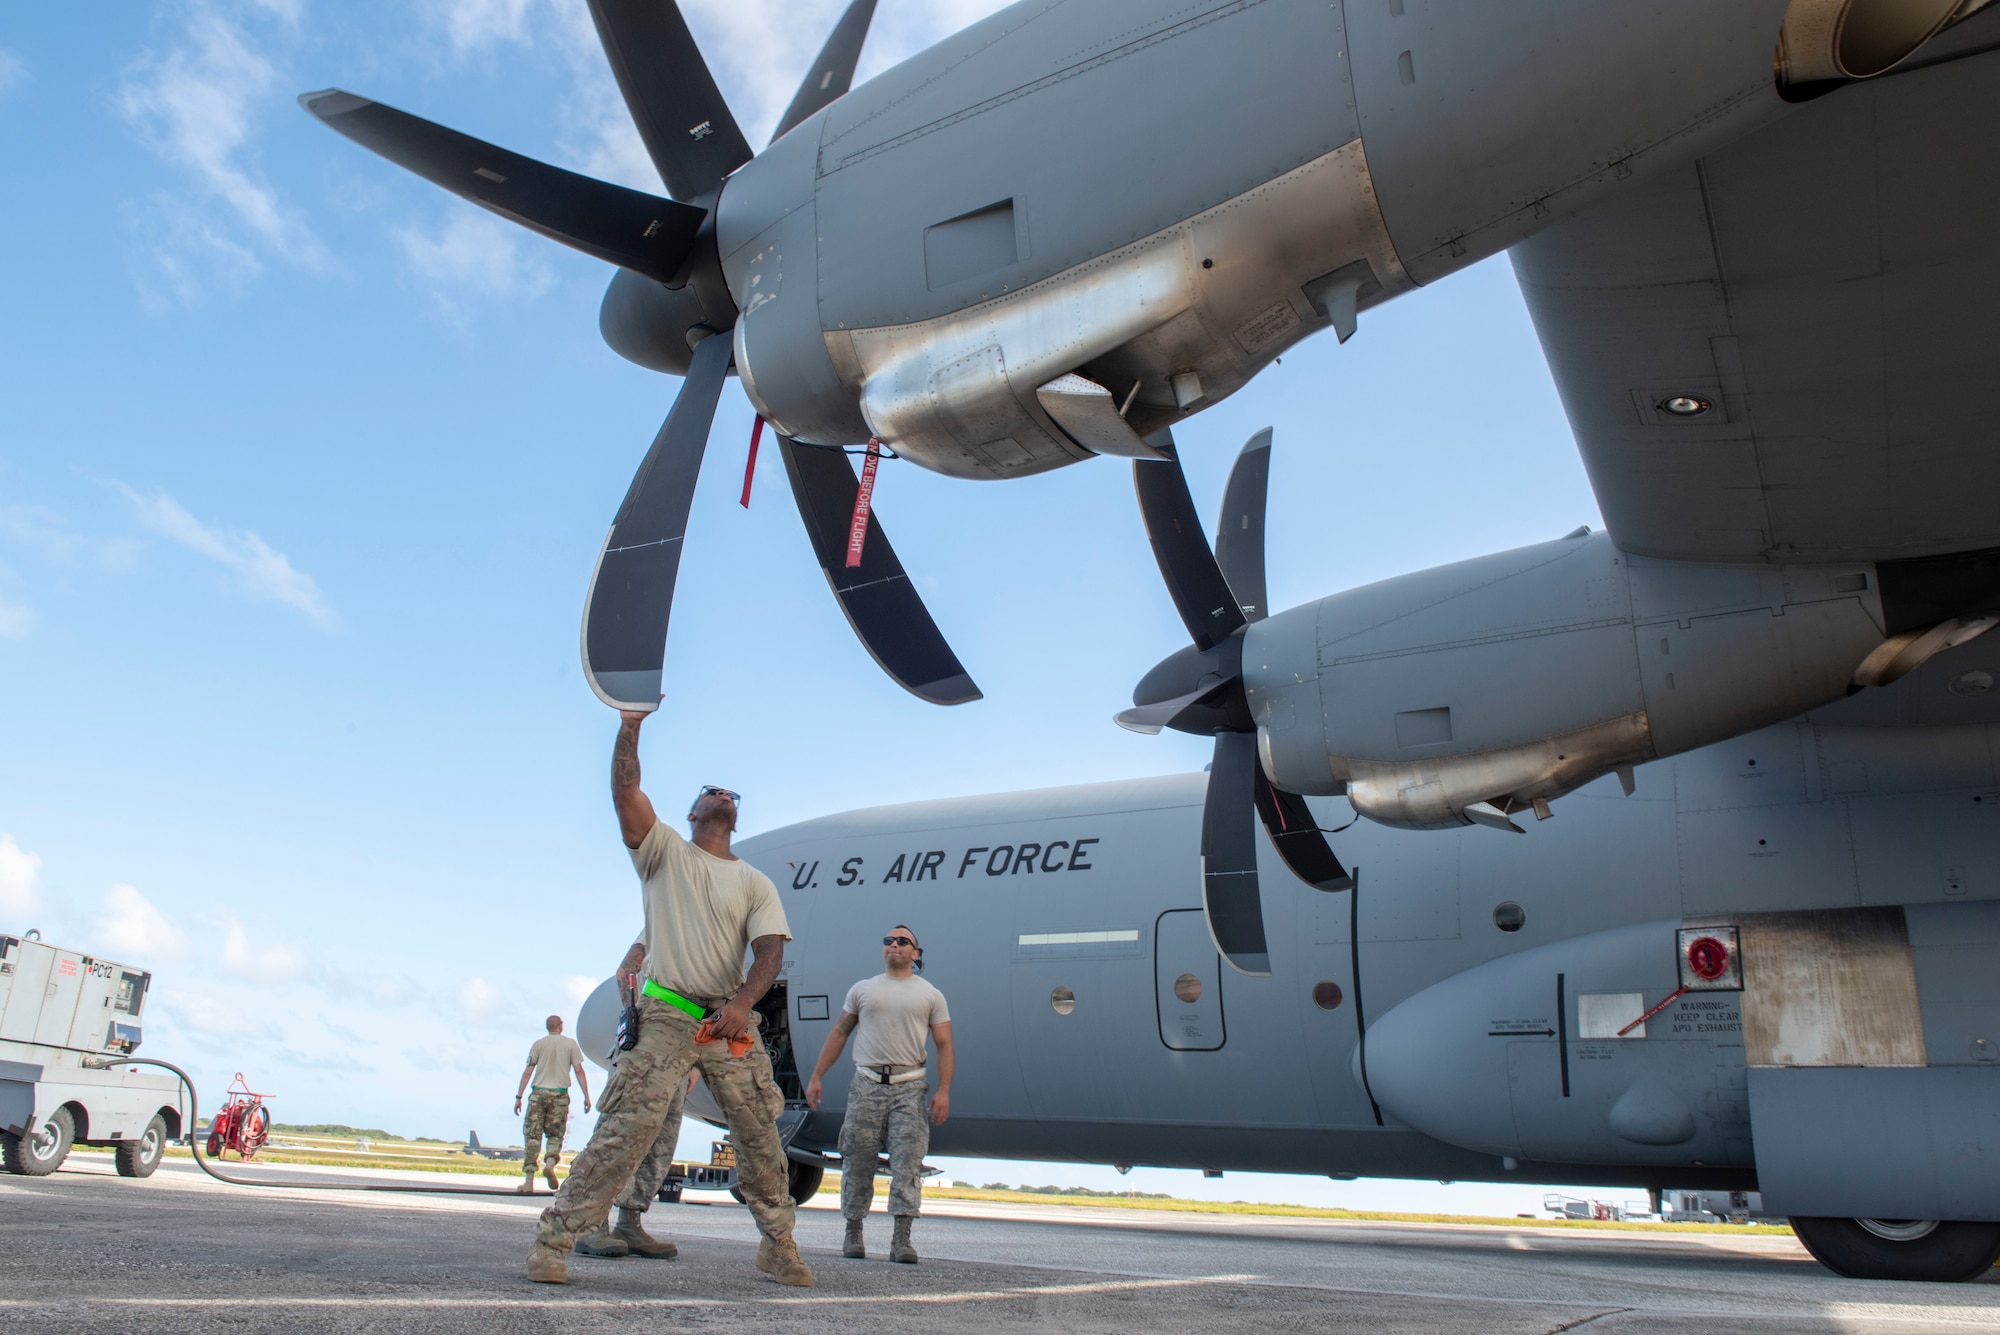 Staff Sgt. Christopher Canto, 374th Aircraft Maintenance Squadron flying crew chief, inspects the propellers of a C-130J Super Hercules during Operation Christmas Drop 2018 at Andersen Air Force Base, Guam, Dec. 9, 2018.